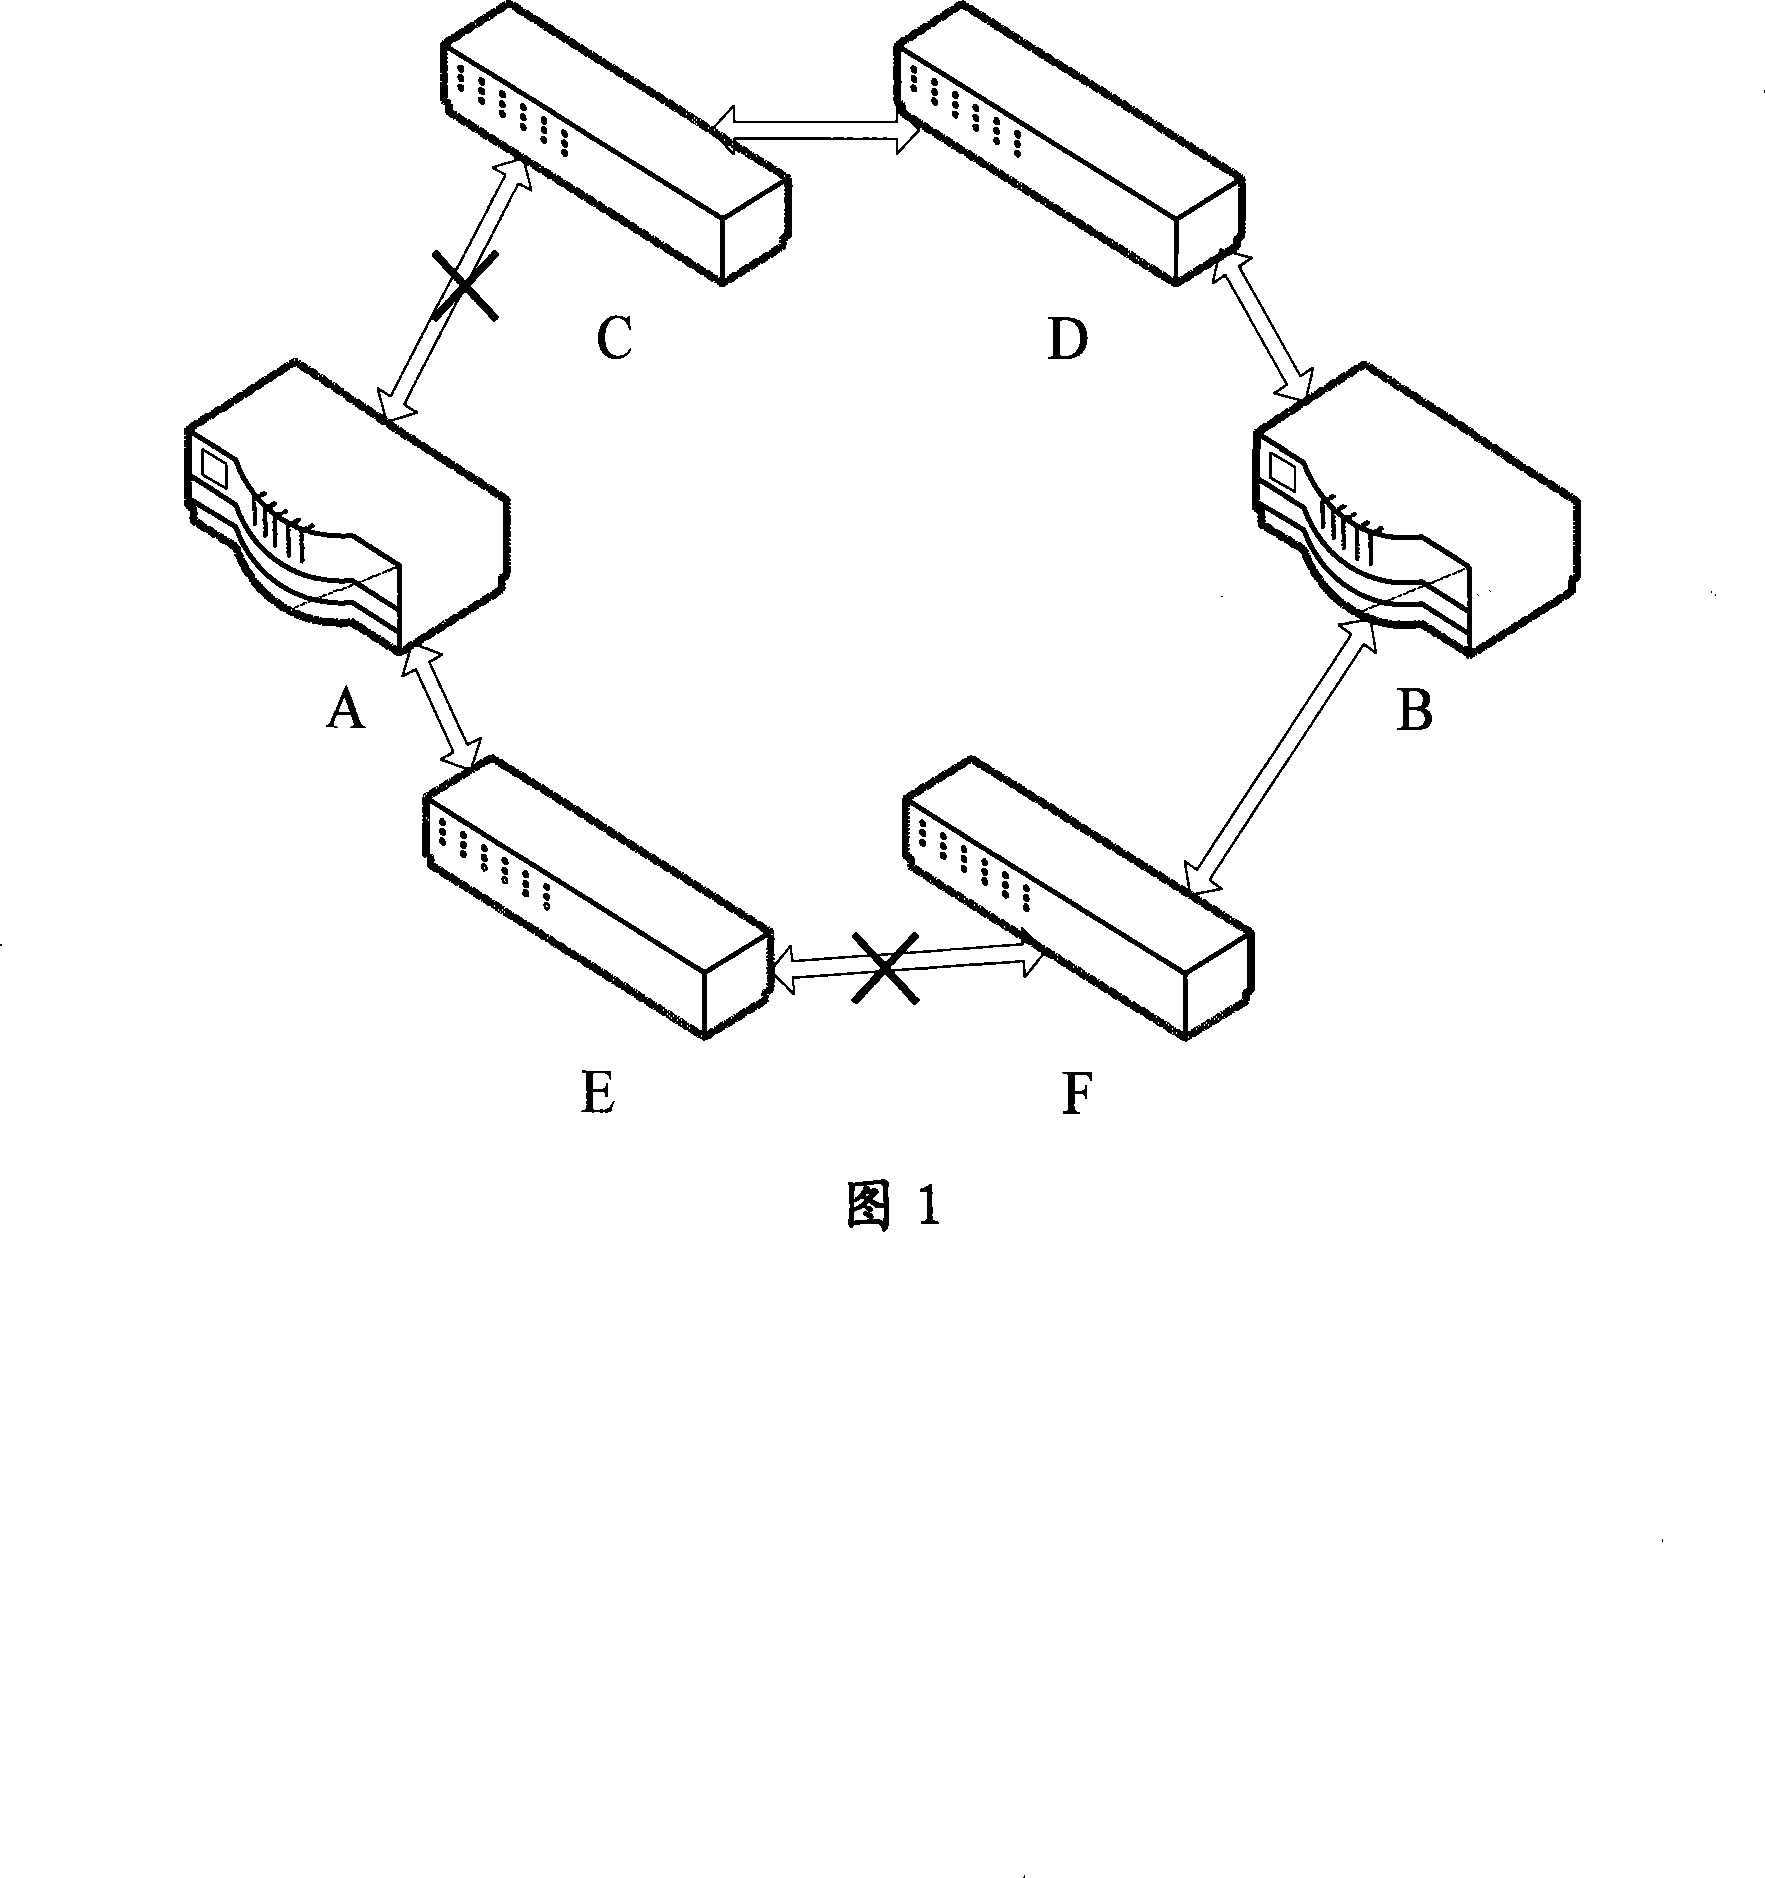 A method for stacking route switching device